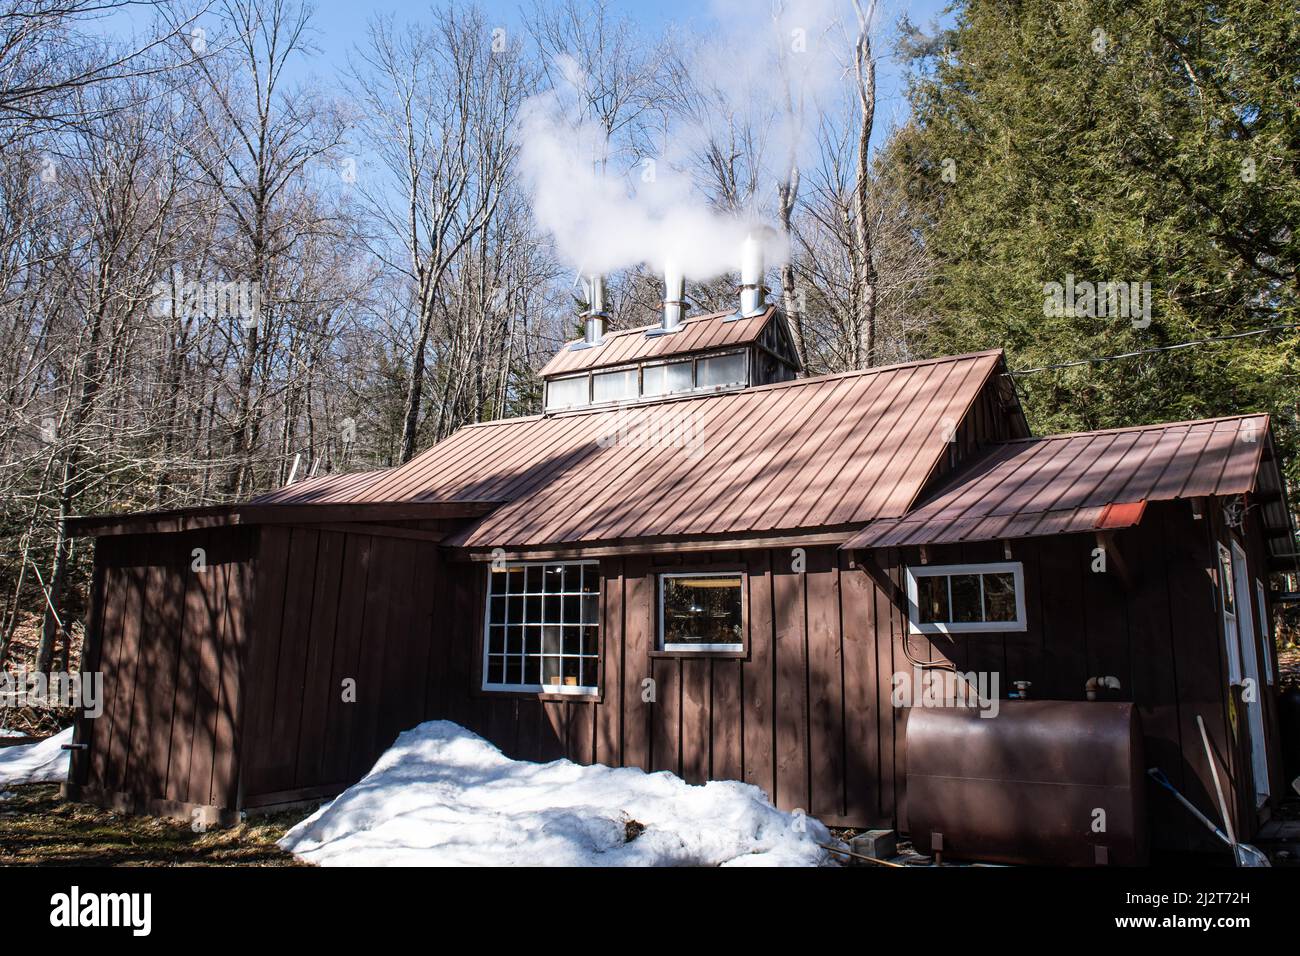 A maple syrup sugar house manufacturing building with steam rising from the chimney in the Adirondack Mountains, NY USA Stock Photo